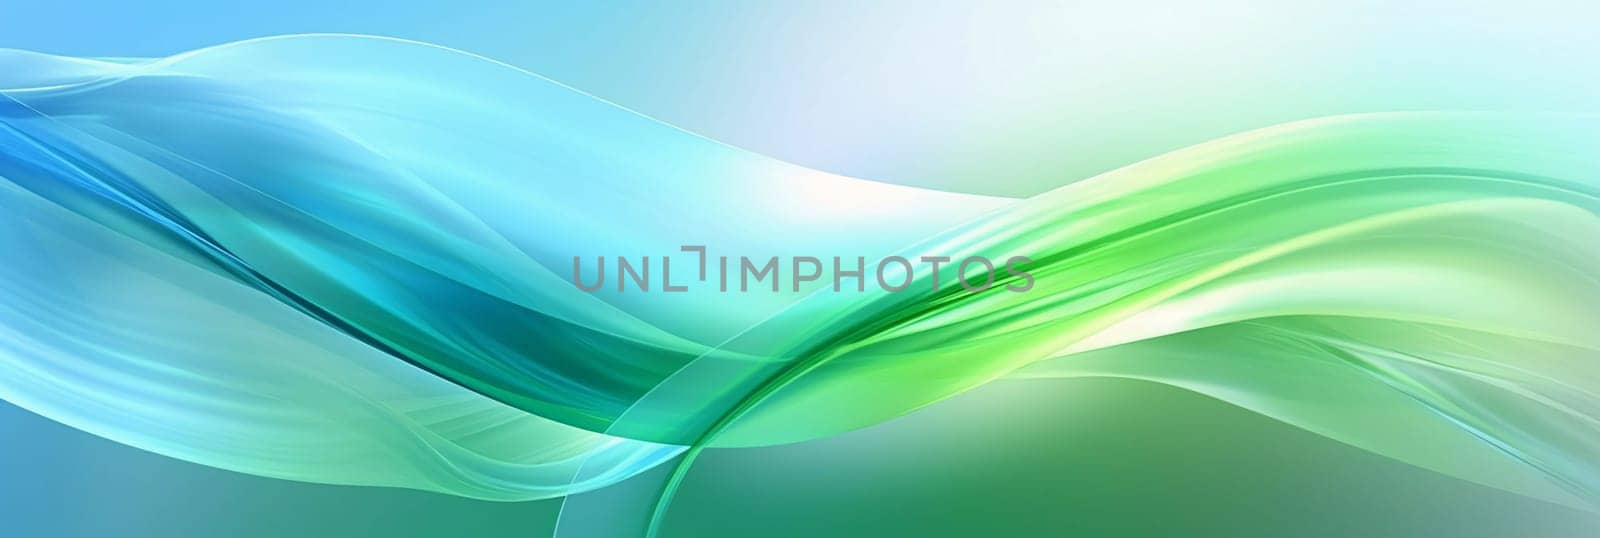 Abstract background with blue and green wavy lines. Vector illustration. by ThemesS